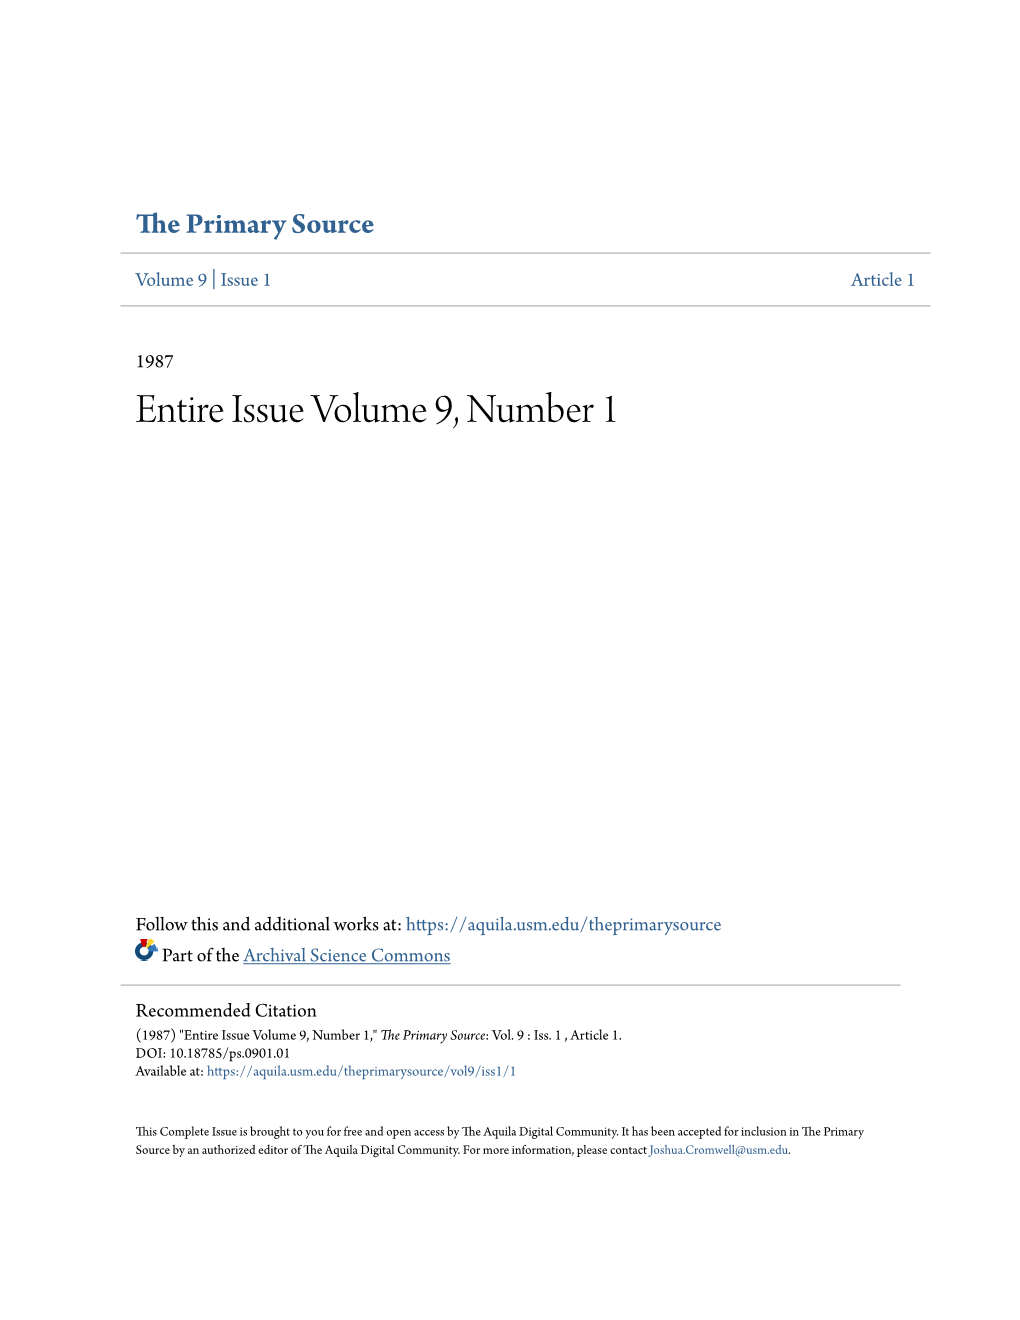 Entire Issue Volume 9, Number 1